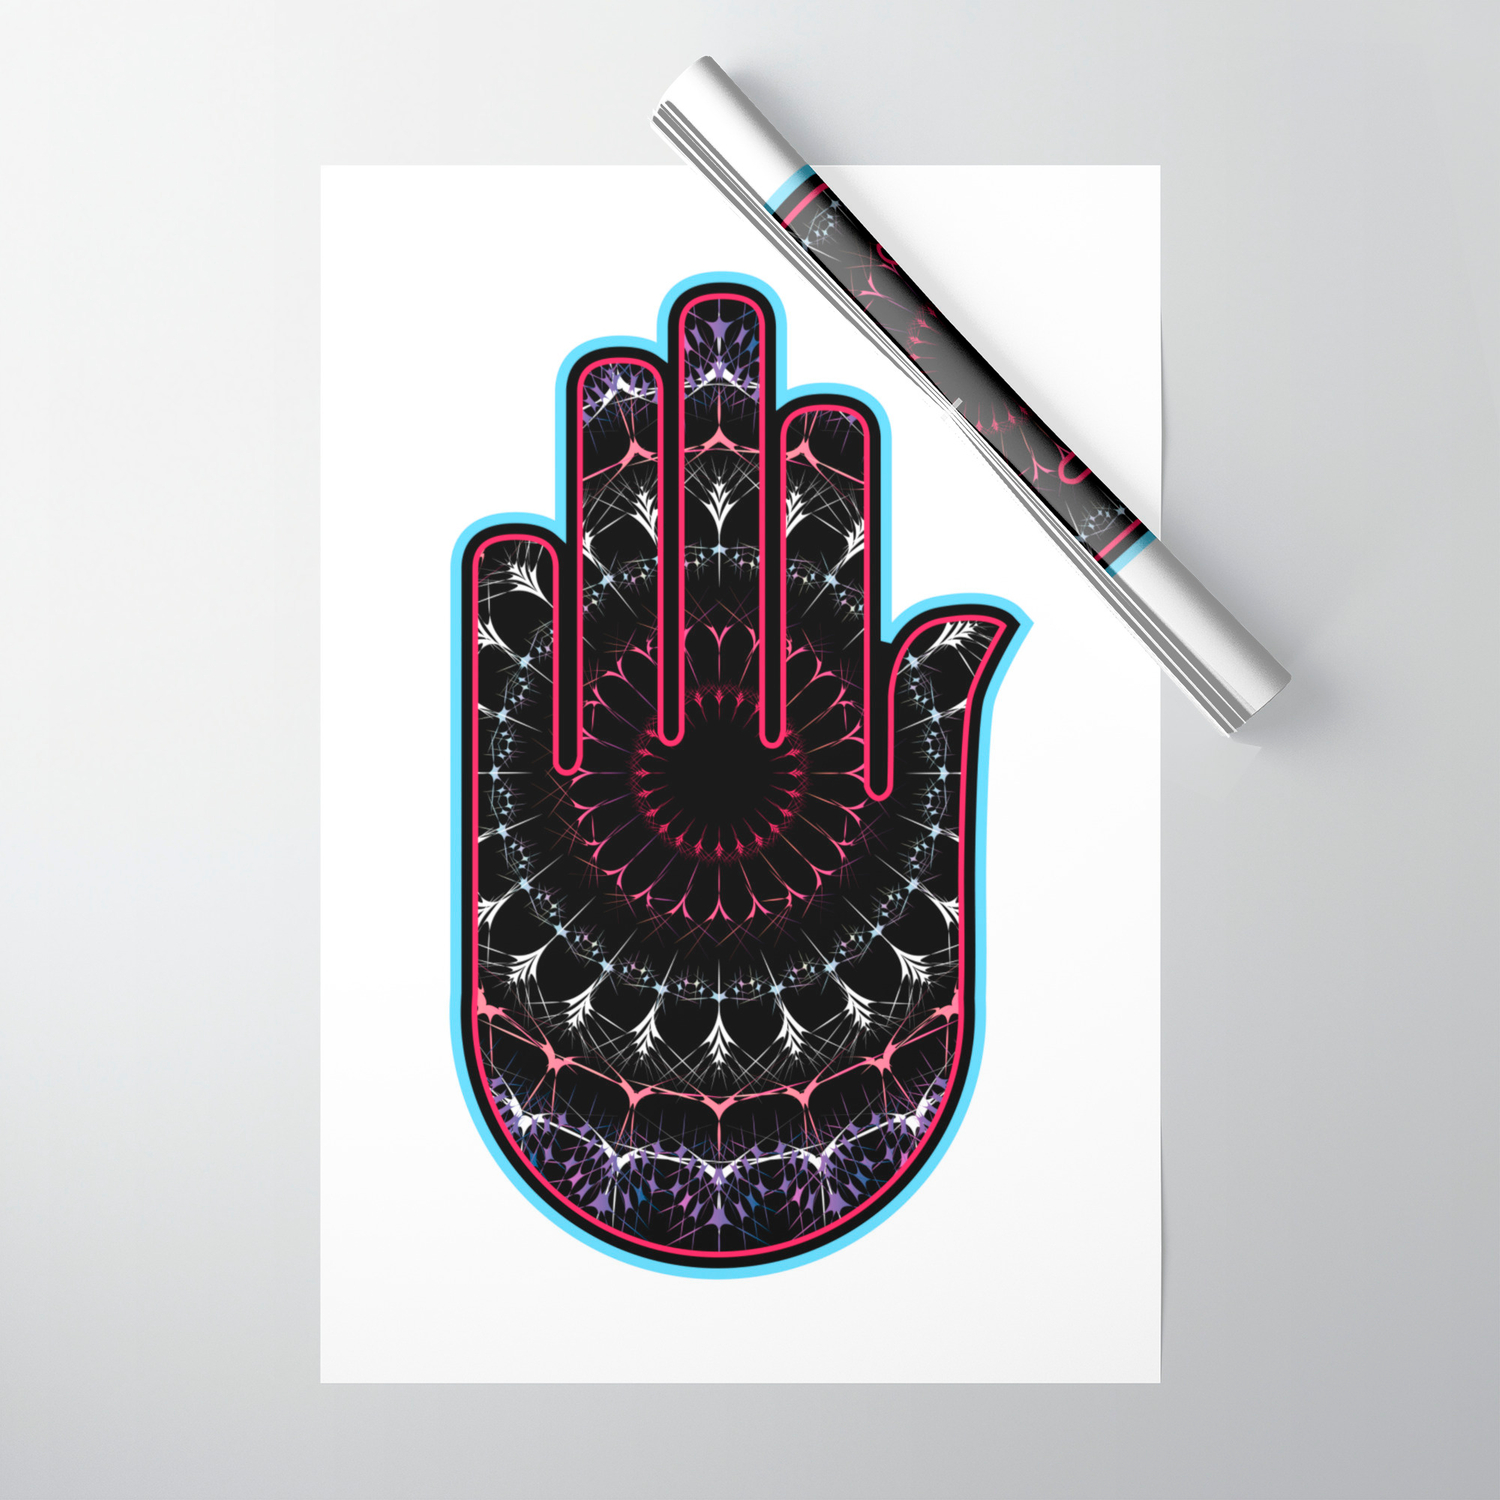 Hamsa Or Fatimas Hand Used As A Sign Of Protection In Middle East